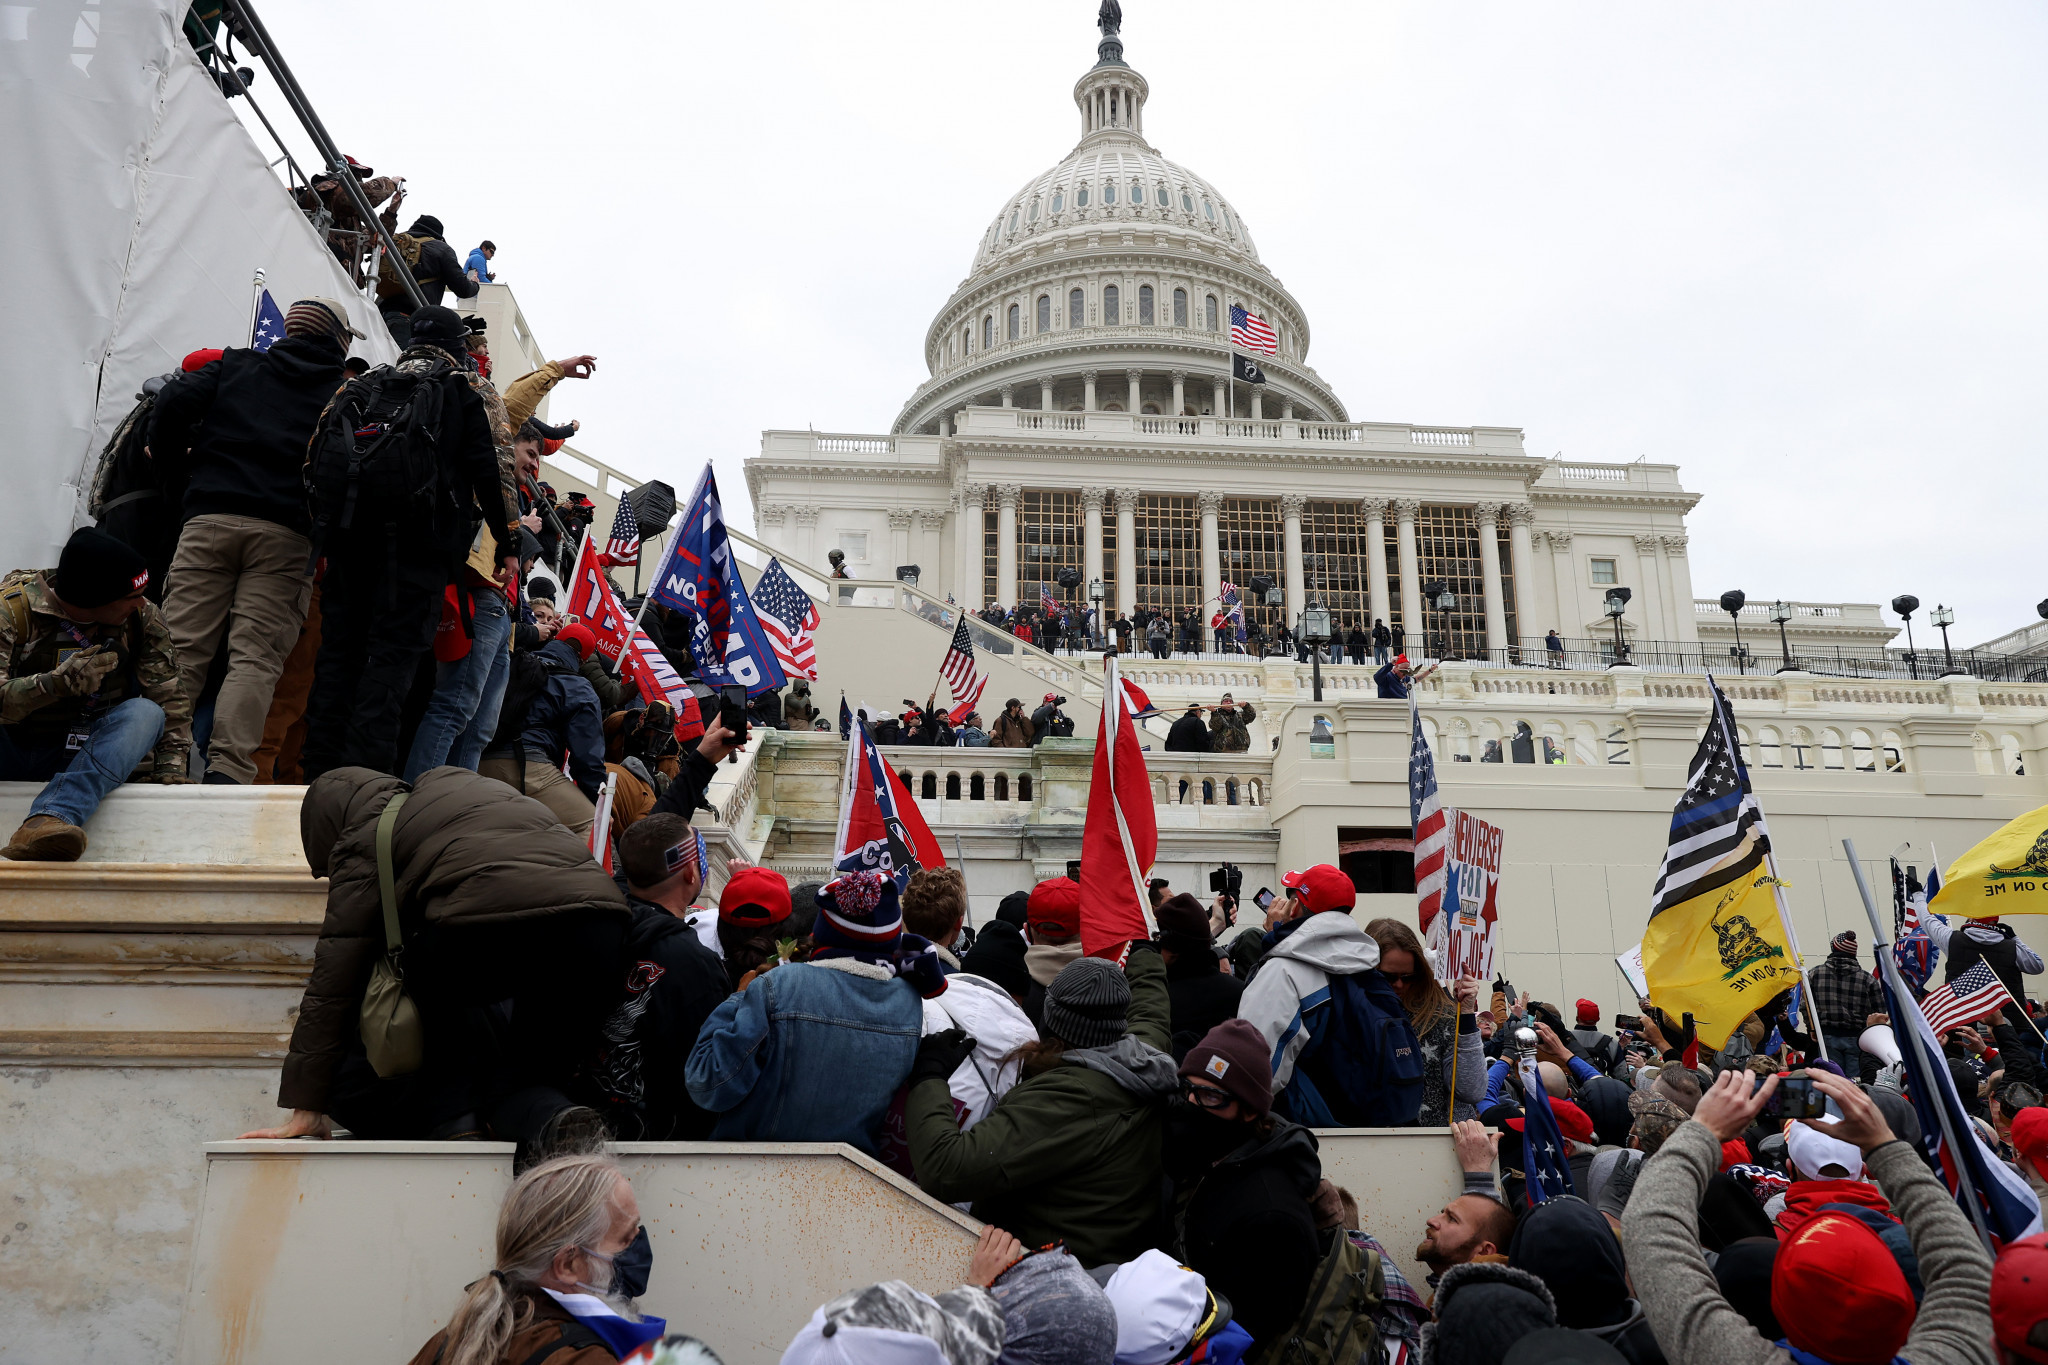 Five people were killed when supporters of Donald Trump stormed the Capitol Building ©Getty Images